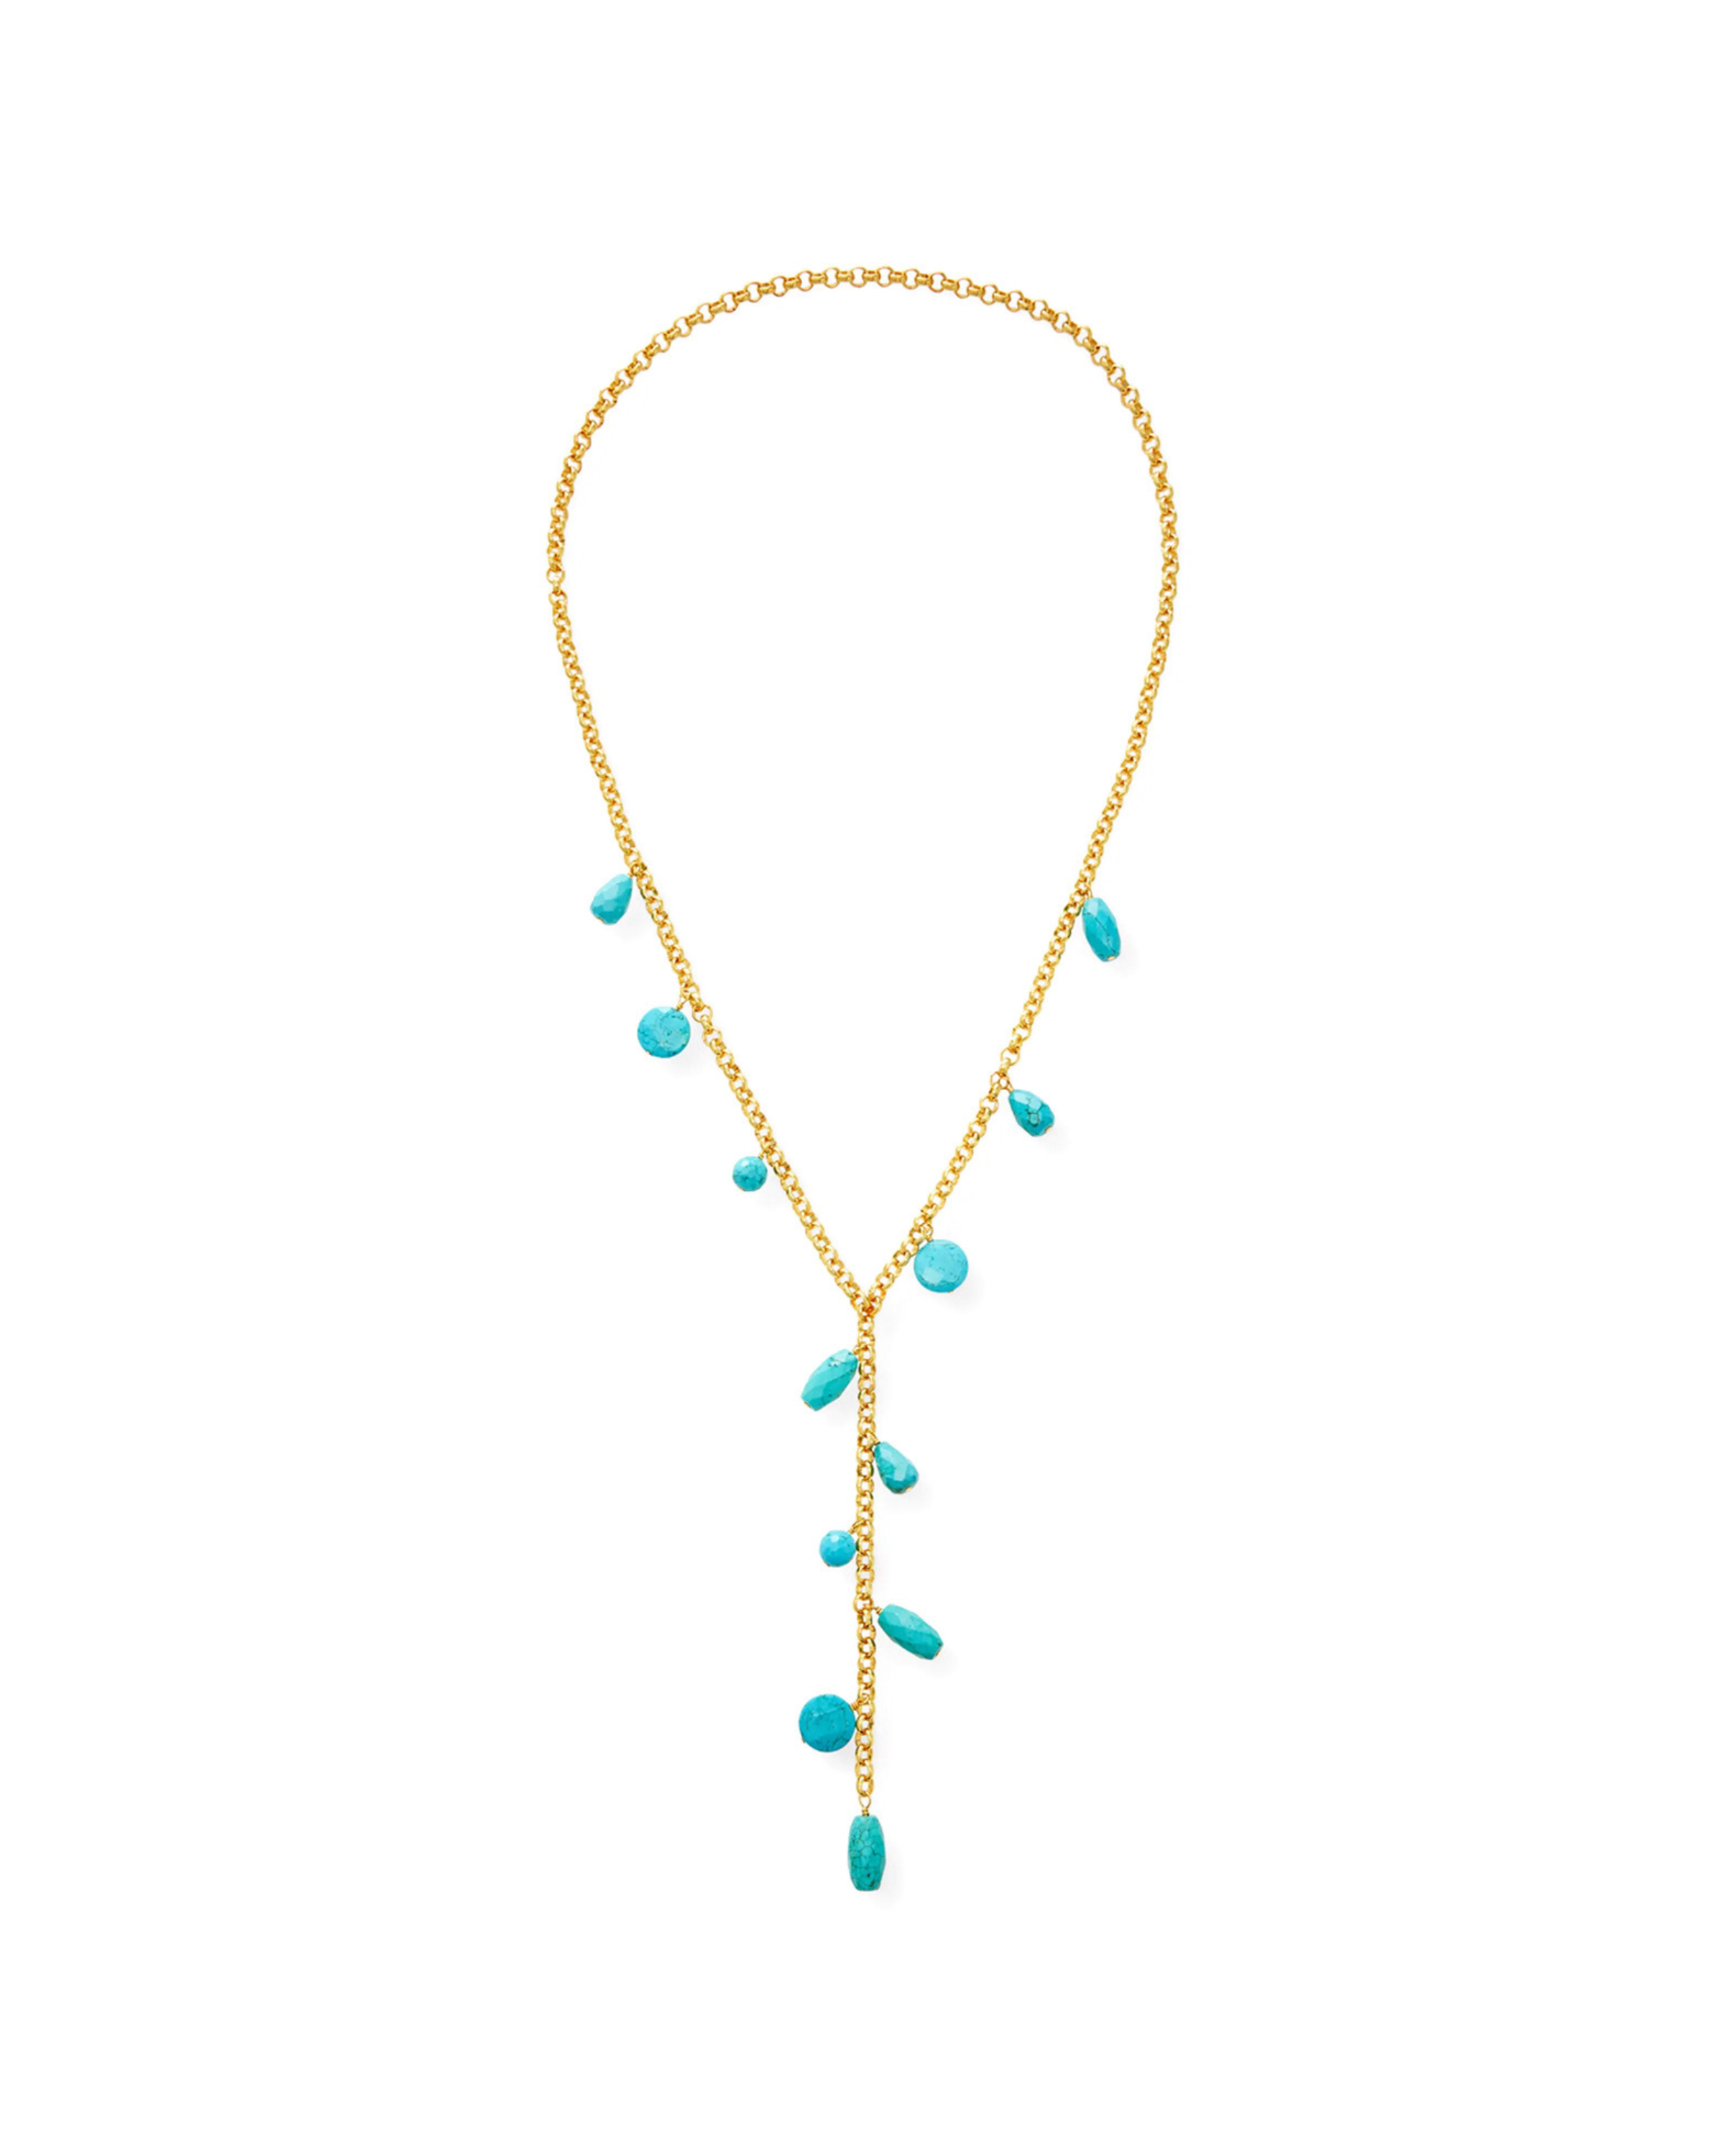 Long Gold Chain Y Necklace w/ Turquoise Charms